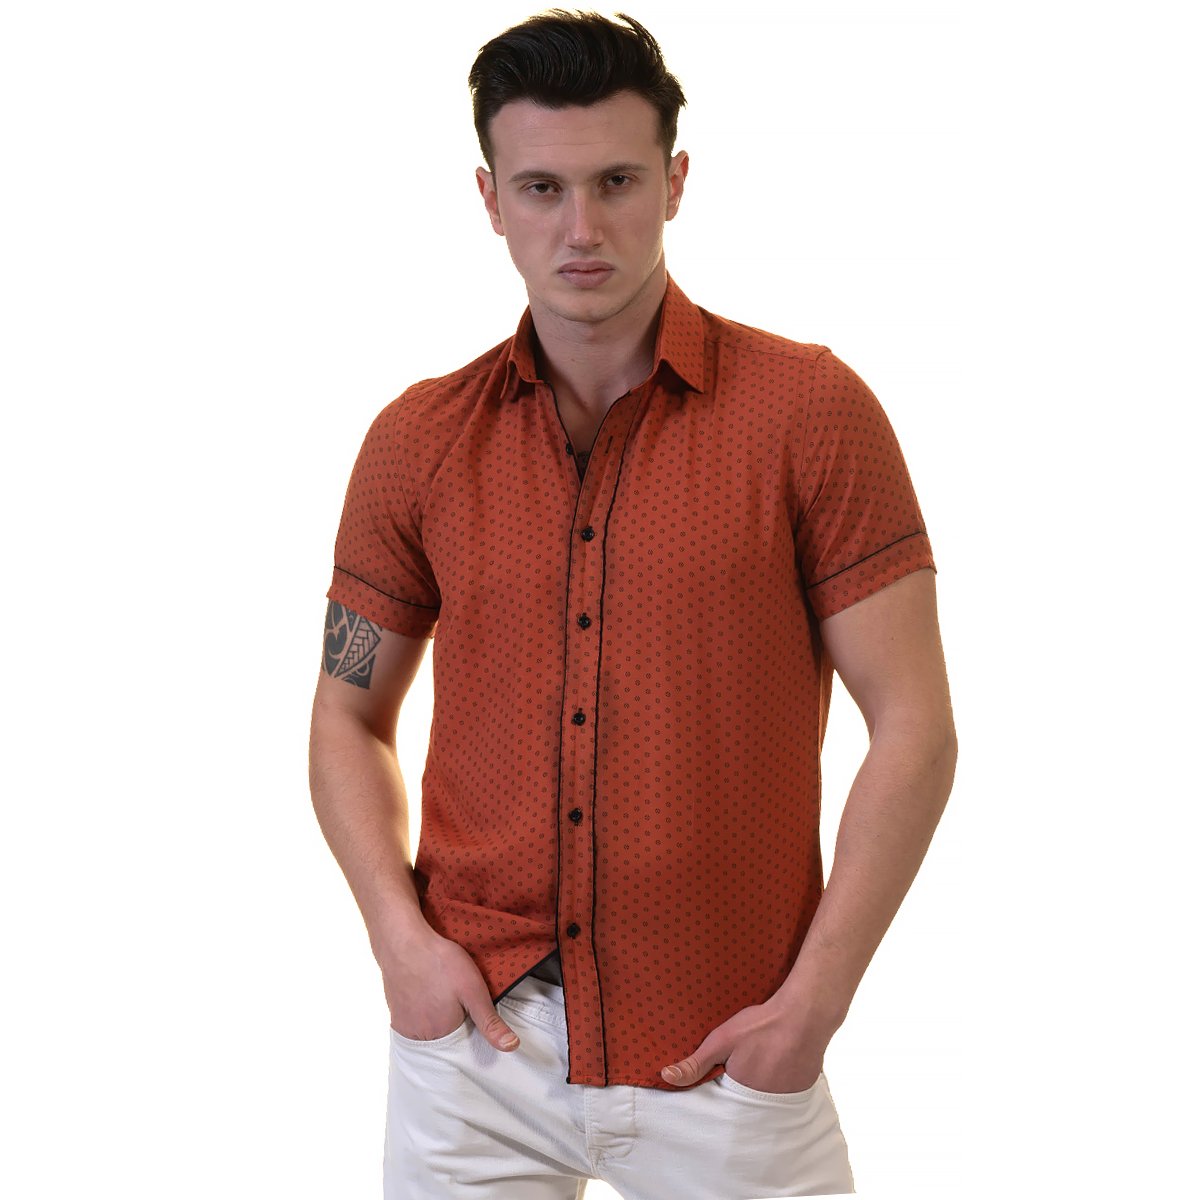 Picture of a Premium Men's Short Sleeve Button Up Shirt in Red front view